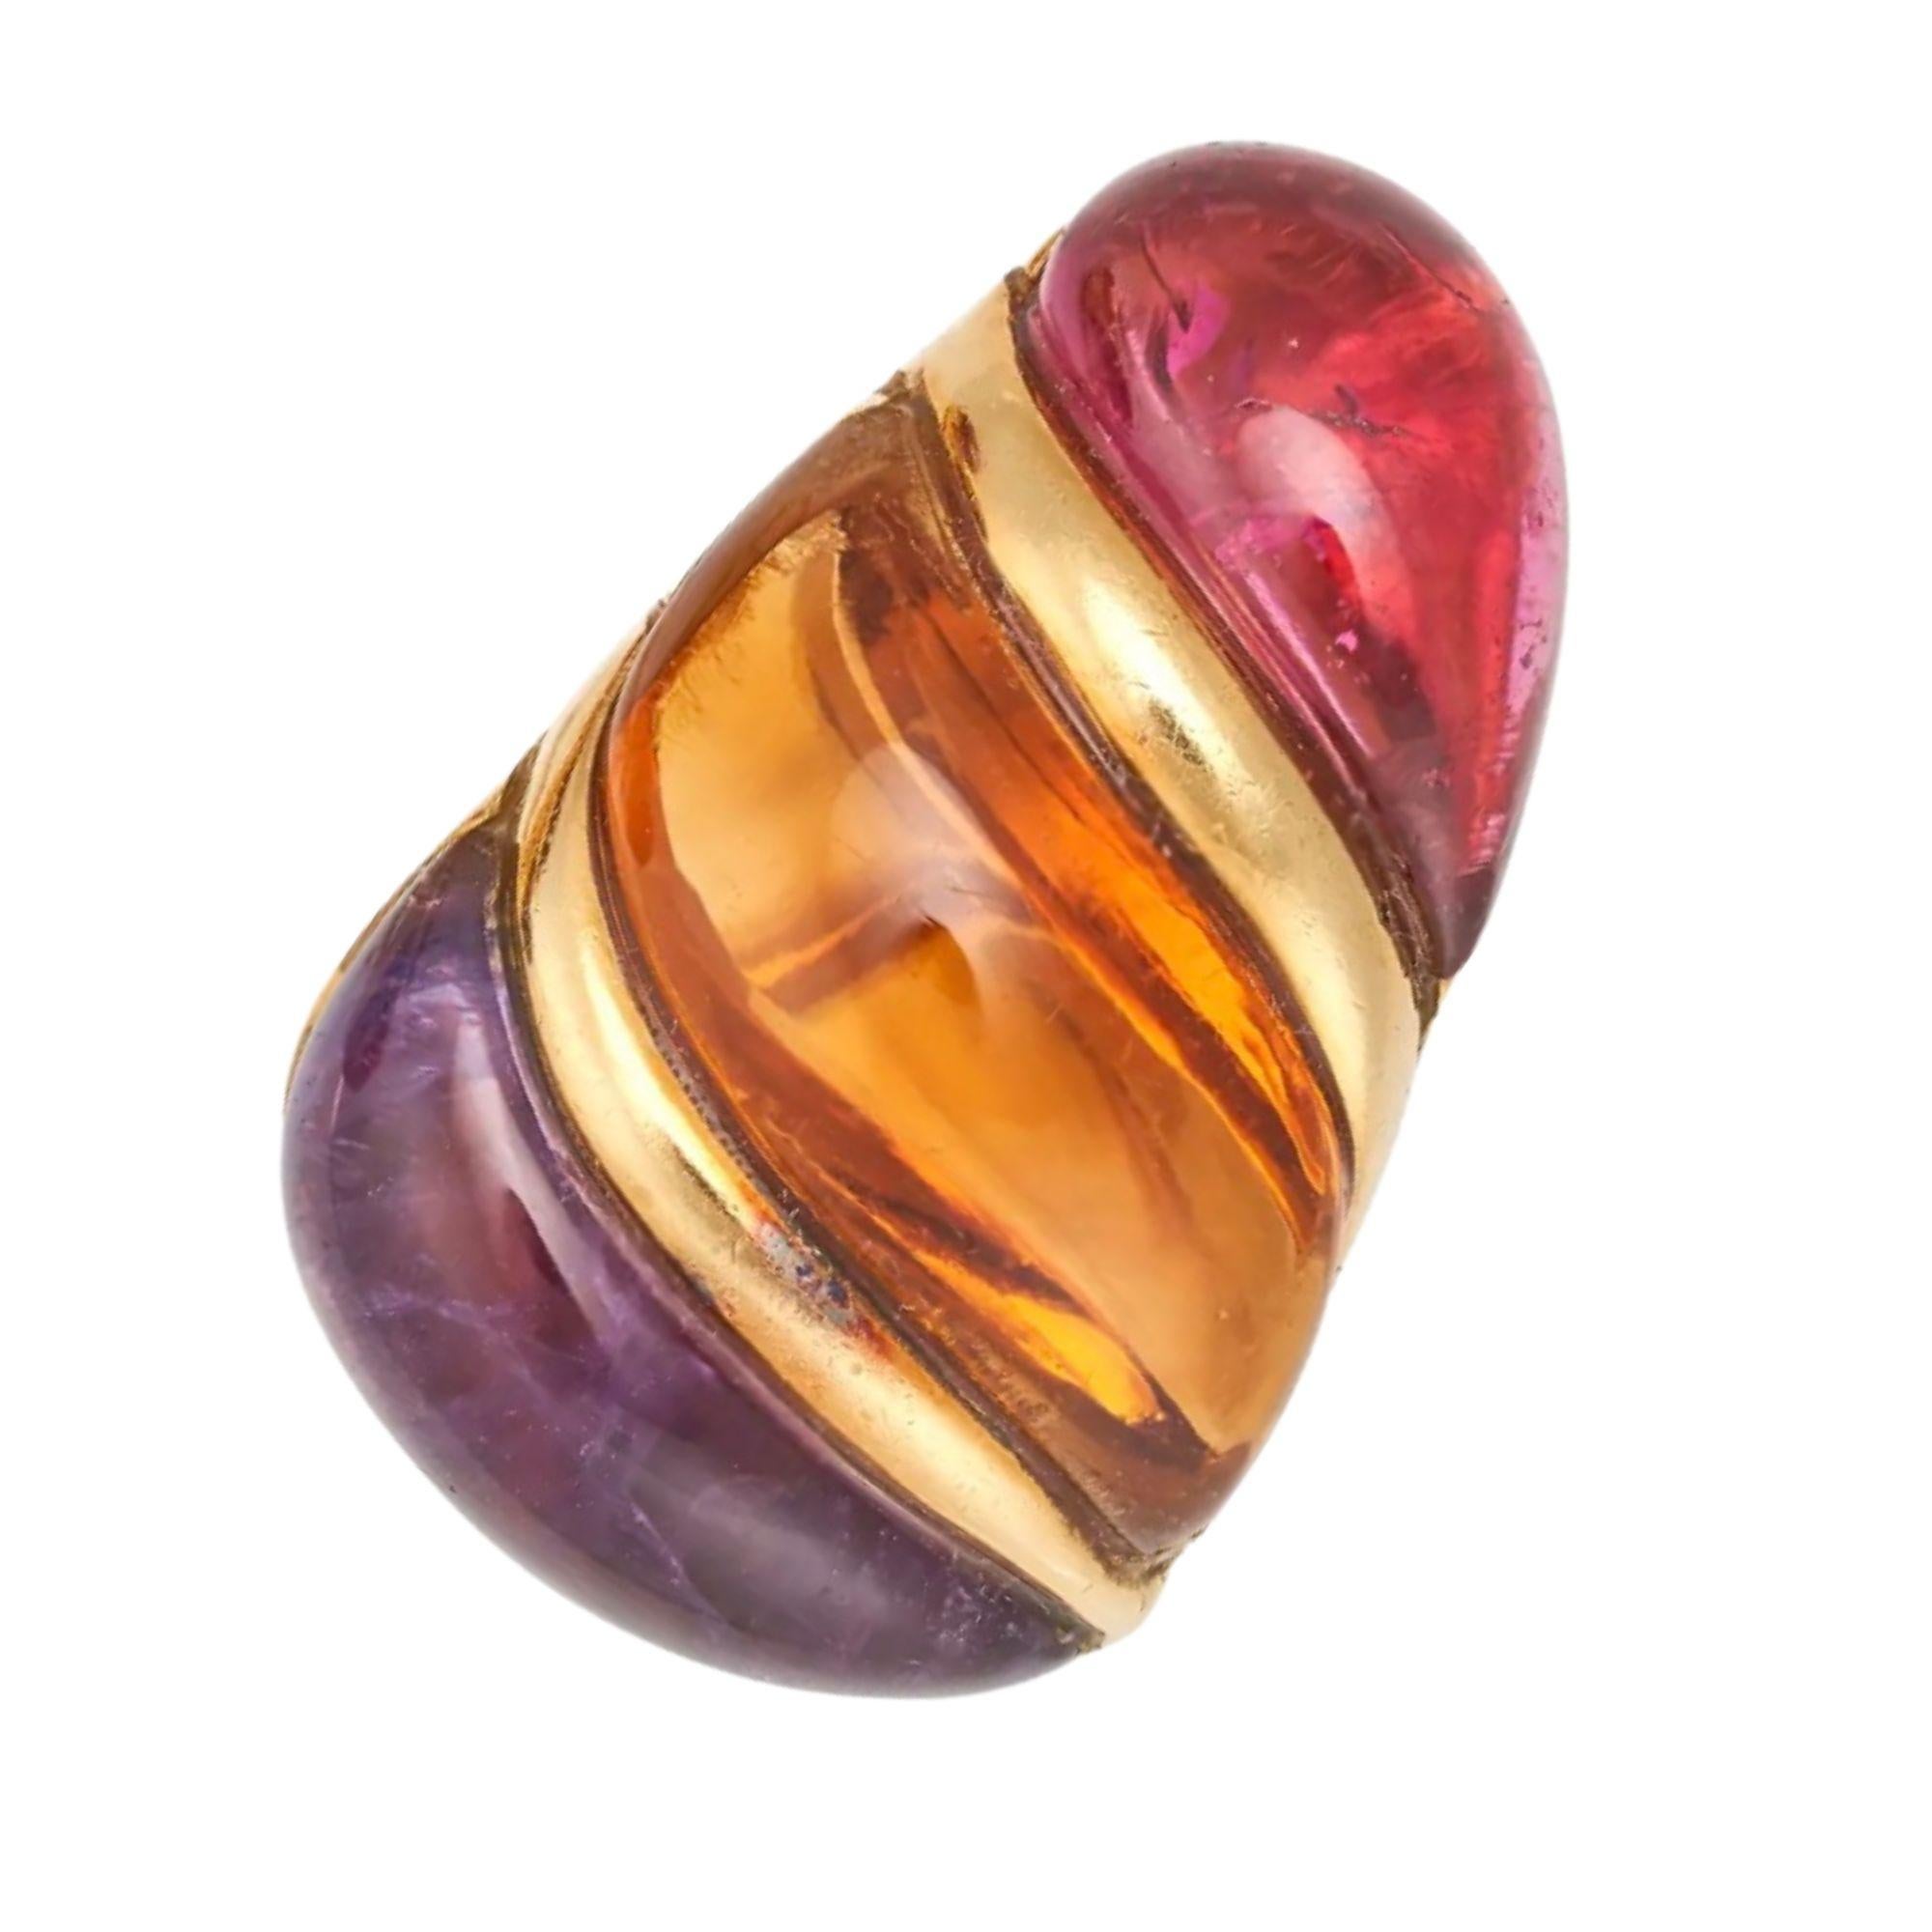 Bulgari swirls together the candy colors of pink tourmaline, amethyst and citrine into these slightly elongated ear clips. Made in 1990 and in 18k yellow gold they represent the best of the Bulgari brand. 

Made in 1990
18k yellow gold 
Polished